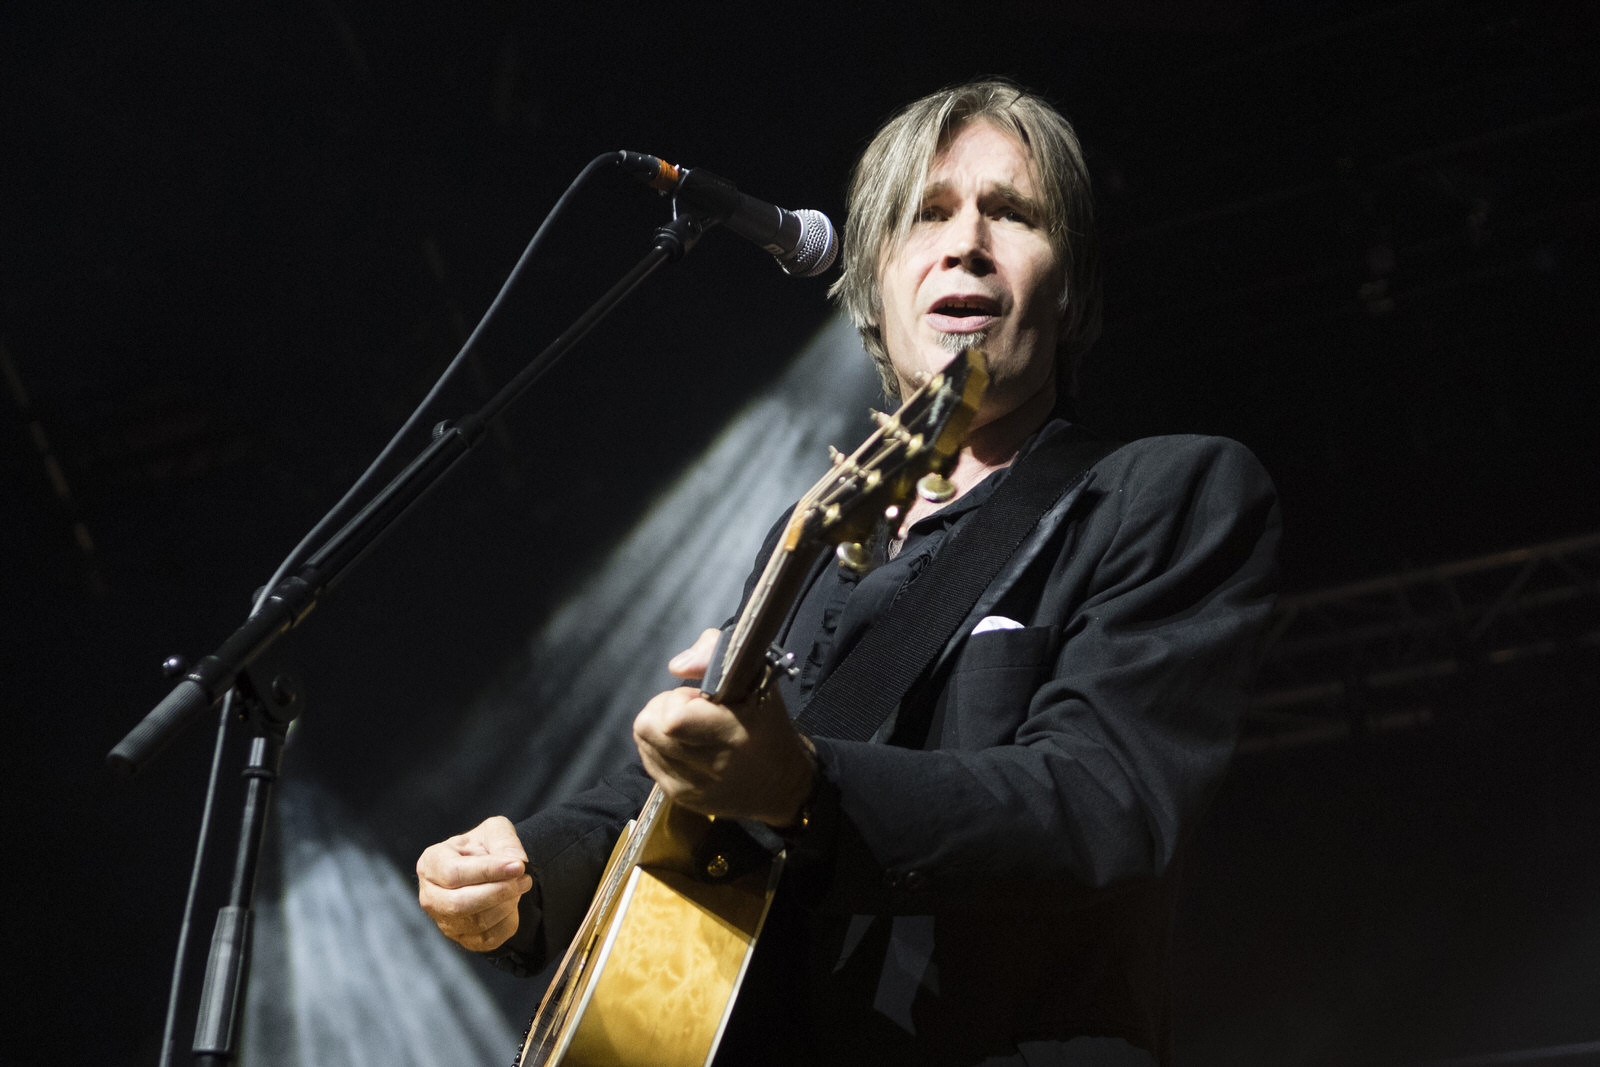 Photo of Del Amitri on stage at Glasgow Barrowlands on 28 July 2018